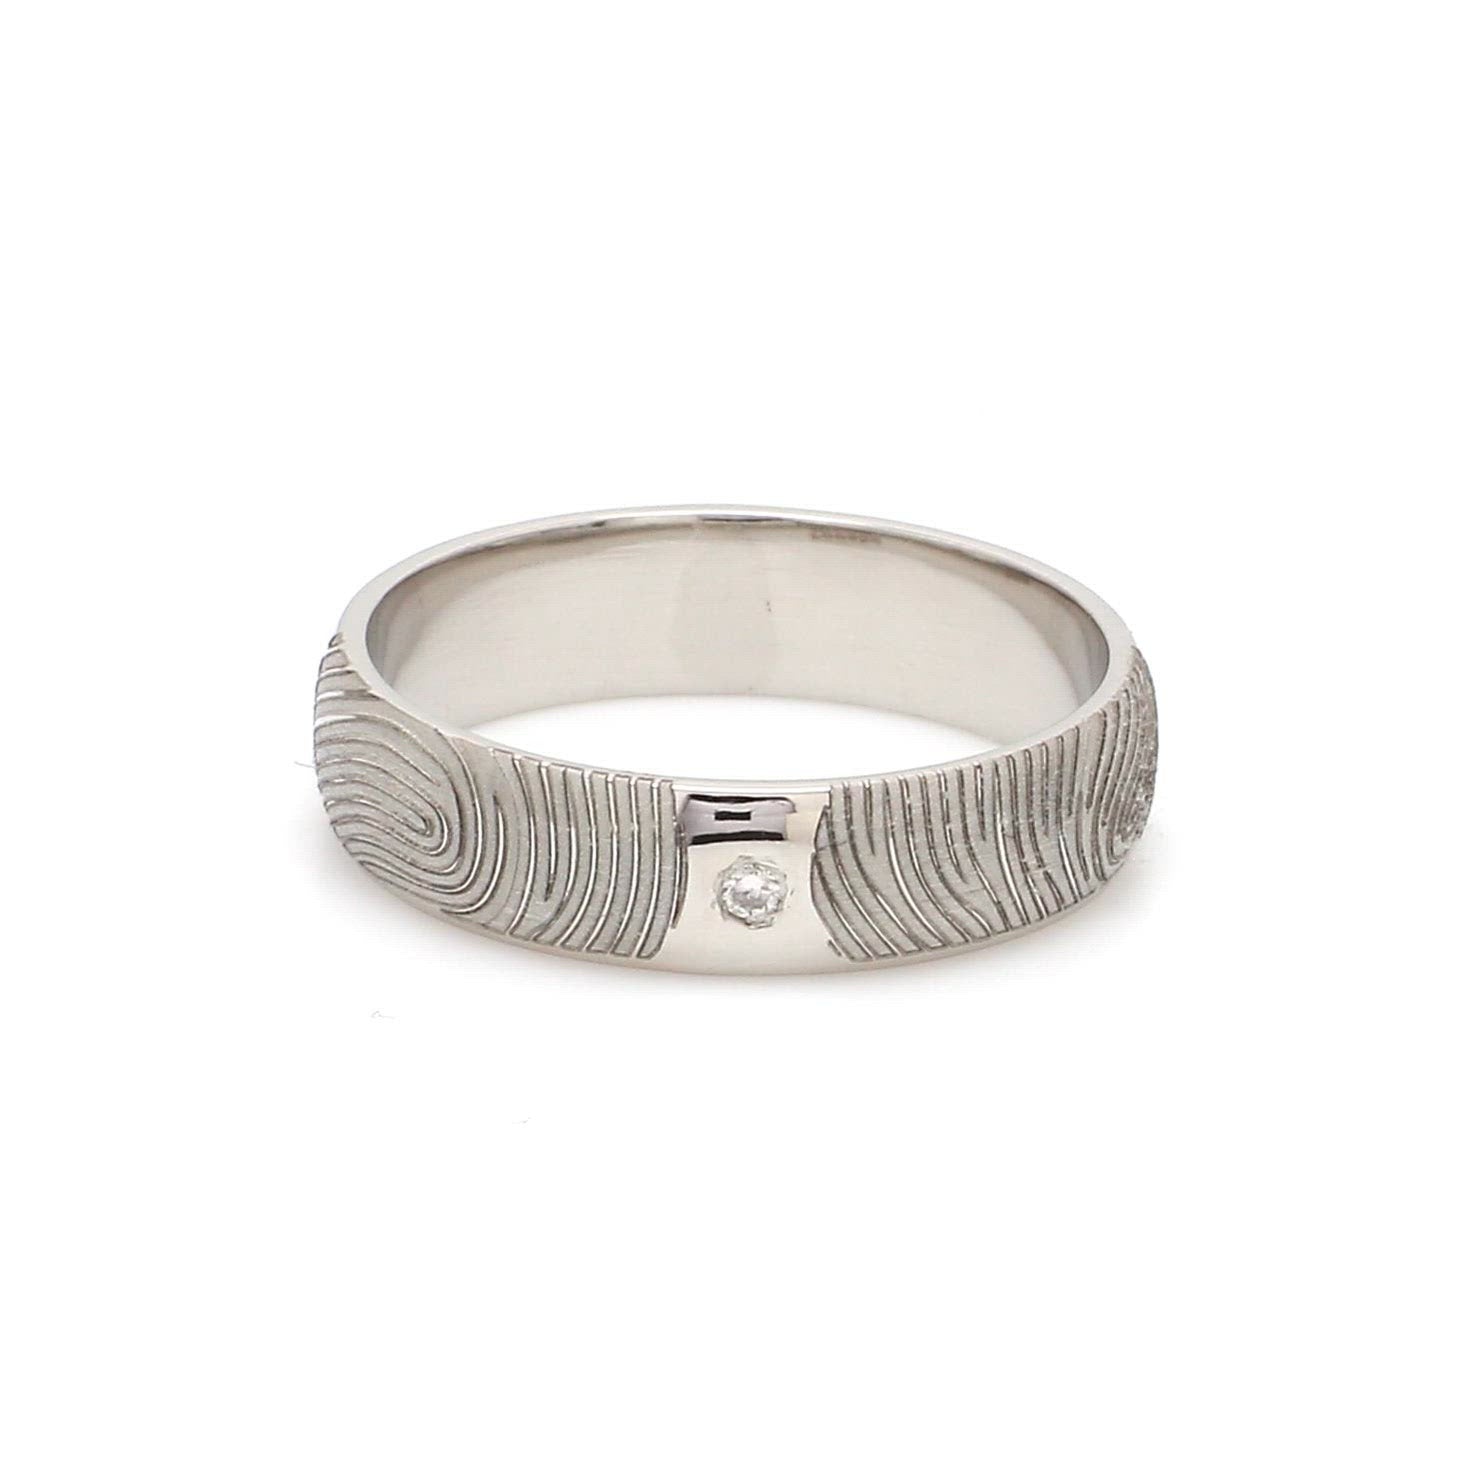 Customized Fingerprint Engraved Platinum Rings with Diamonds for Couples